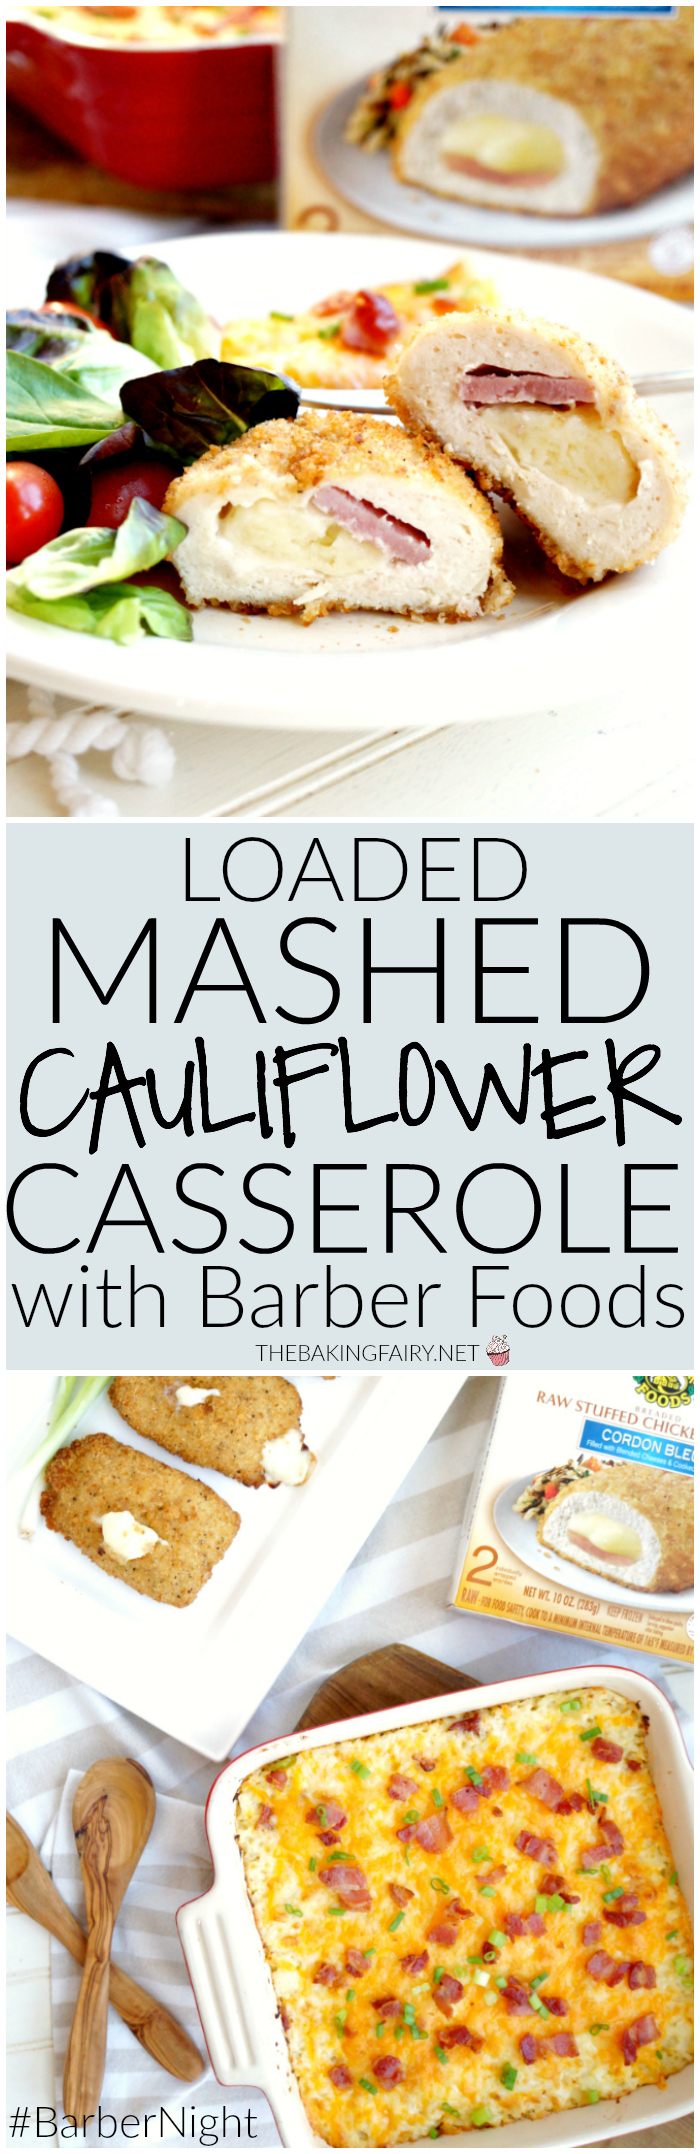 loaded mashed cauliflower casserole with Barber Foods stuffed chicken | The Baking Fairy #ad